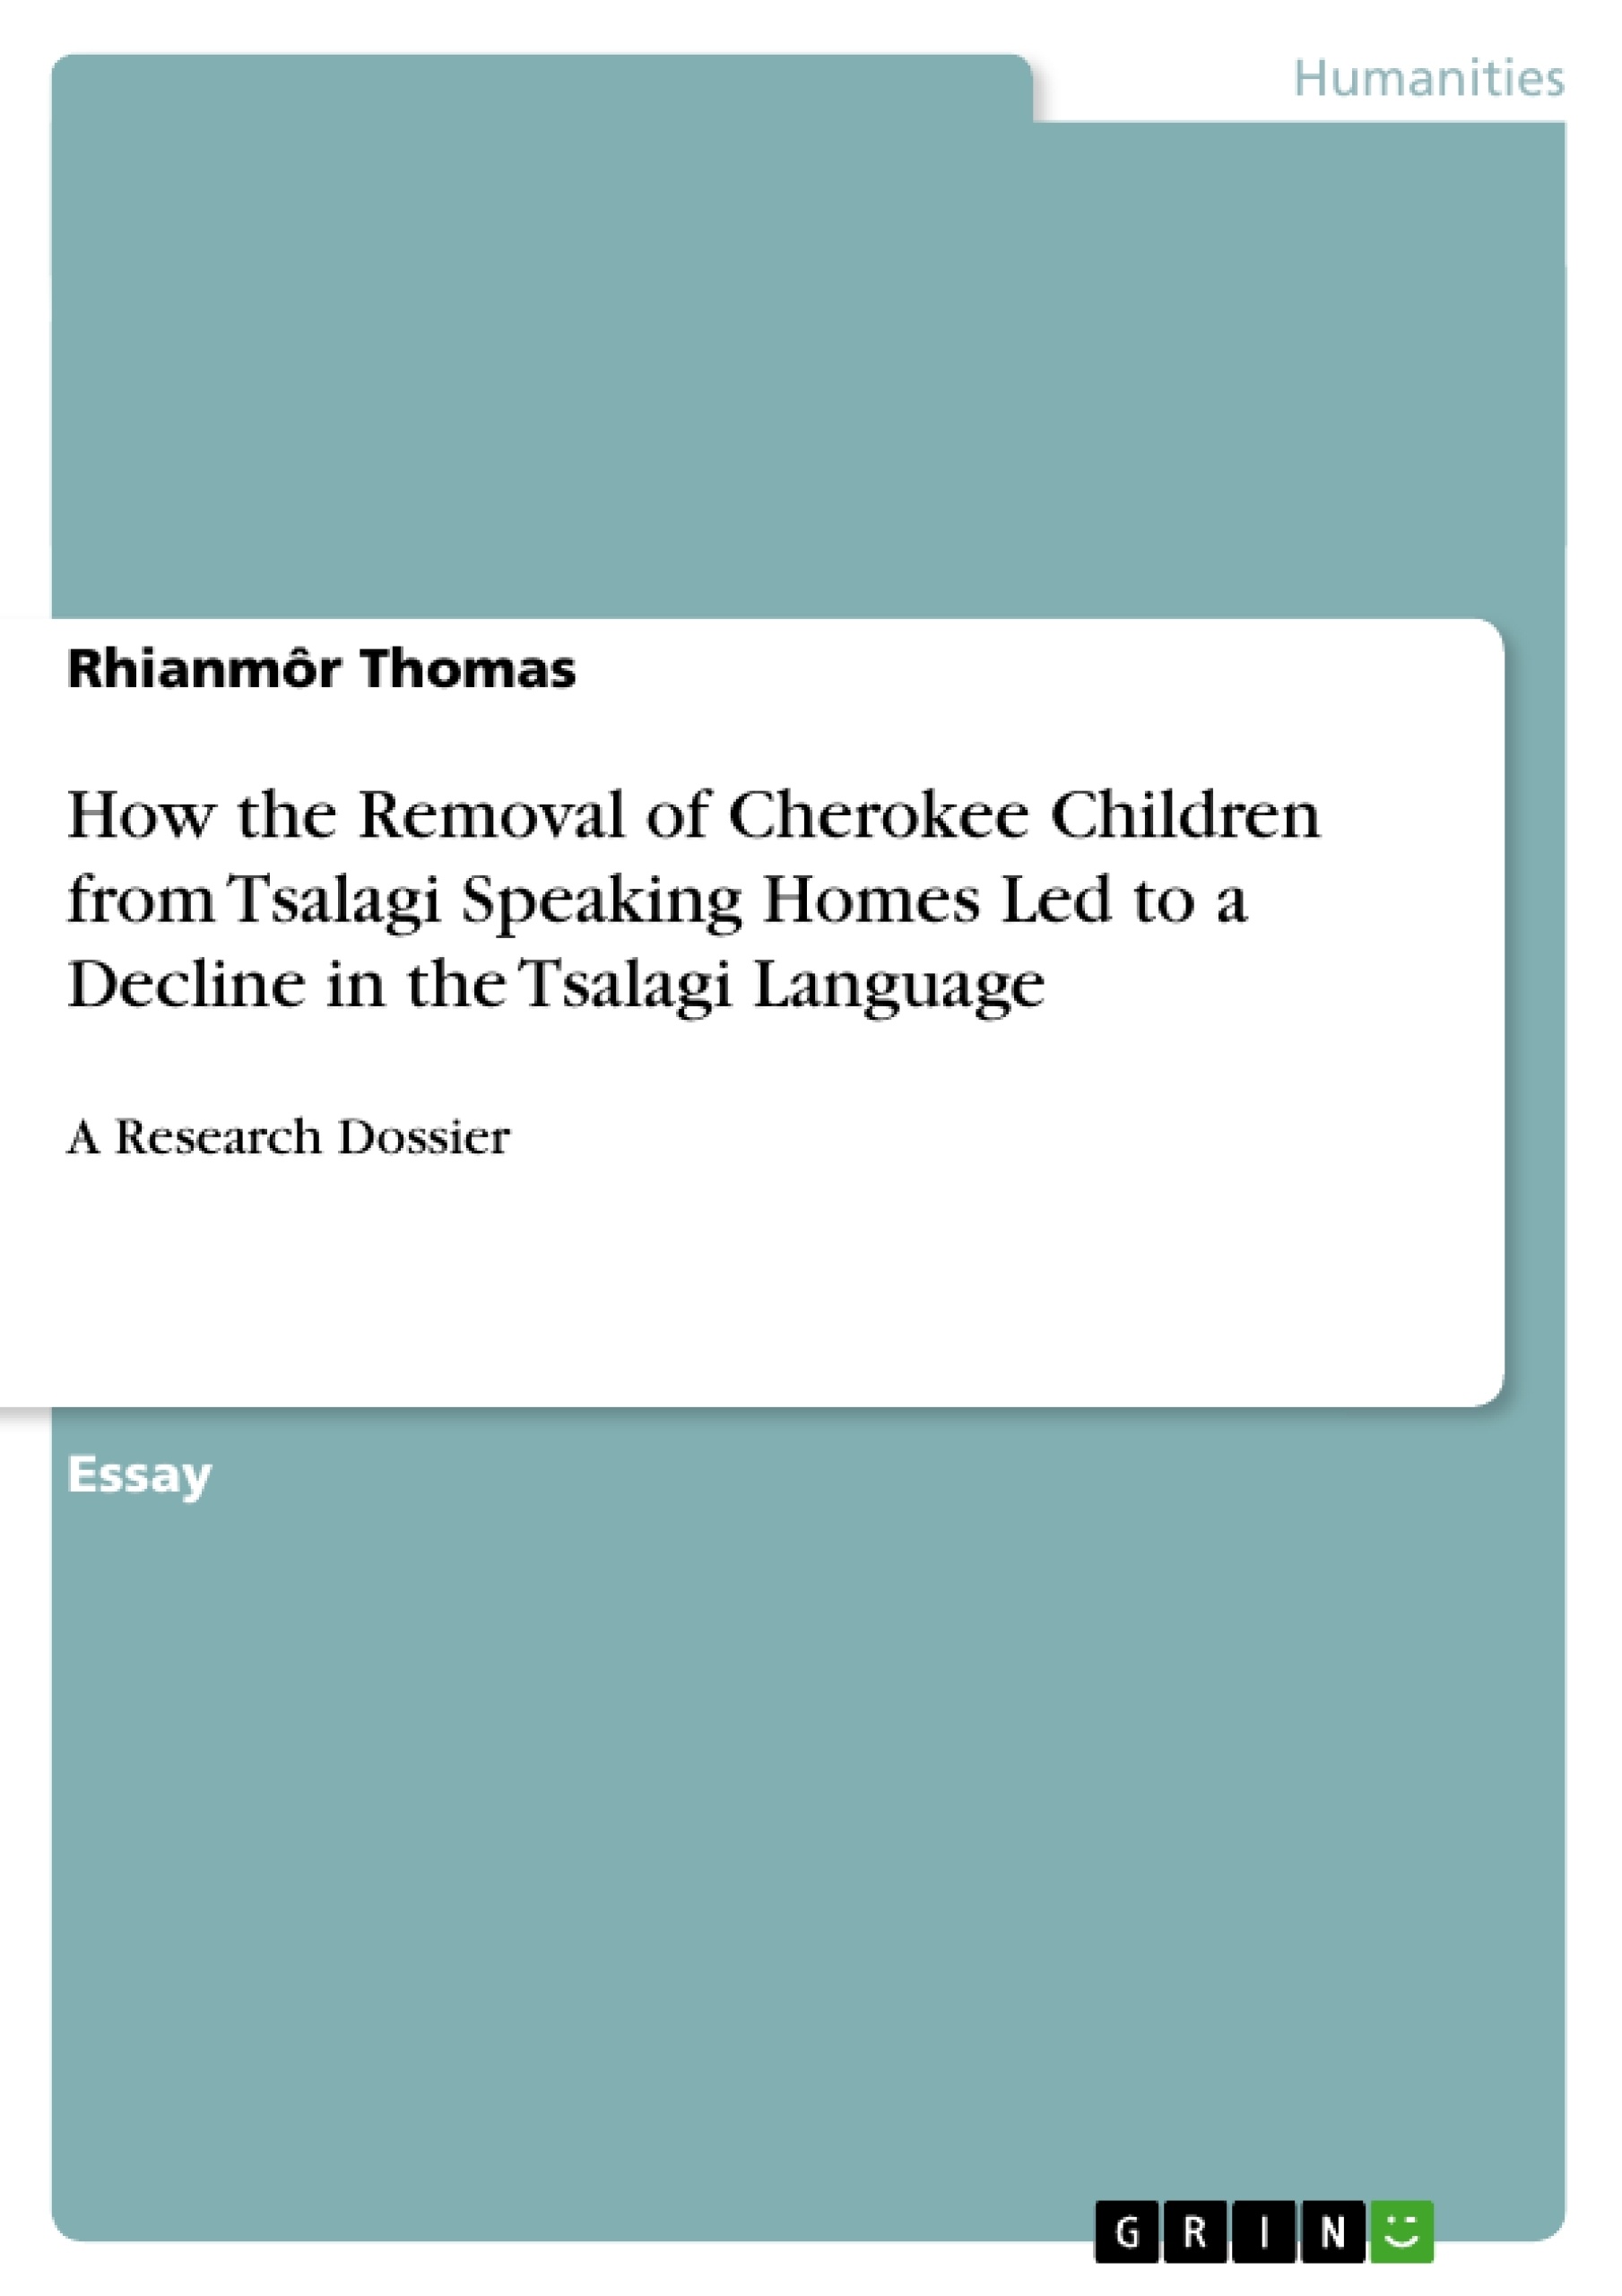 Title: How the Removal of Cherokee Children from Tsalagi Speaking Homes Led to a Decline in the Tsalagi Language